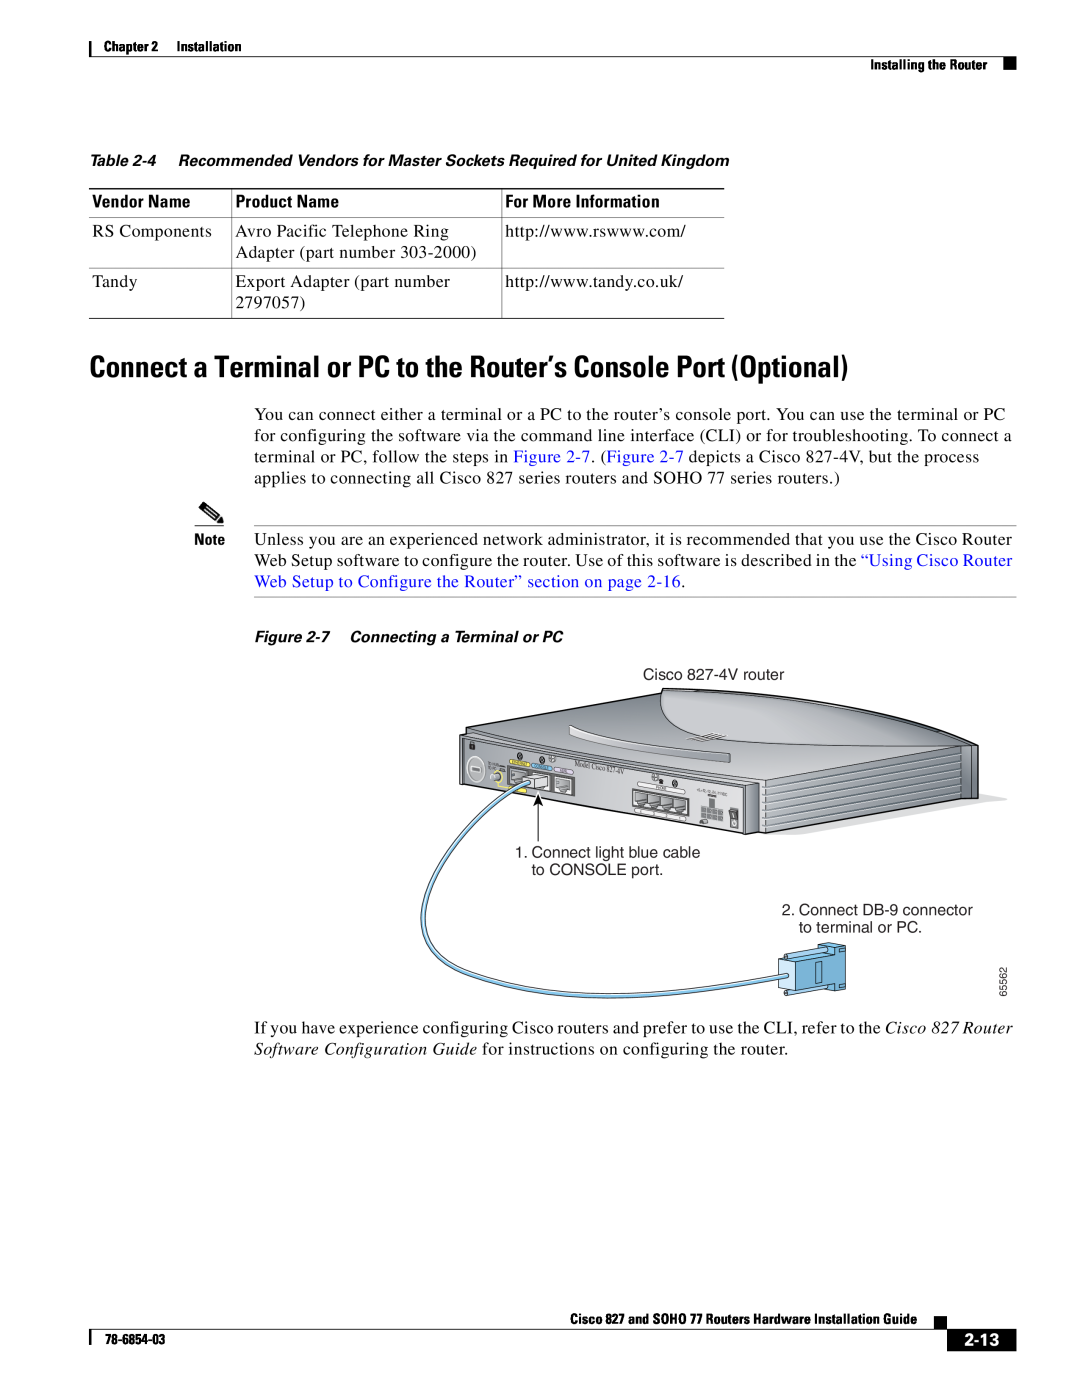 Cisco Systems SOHO 77 Connect a Terminal or PC to the Router’s Console Port Optional, 2-13, Vendor Name, Product Name 